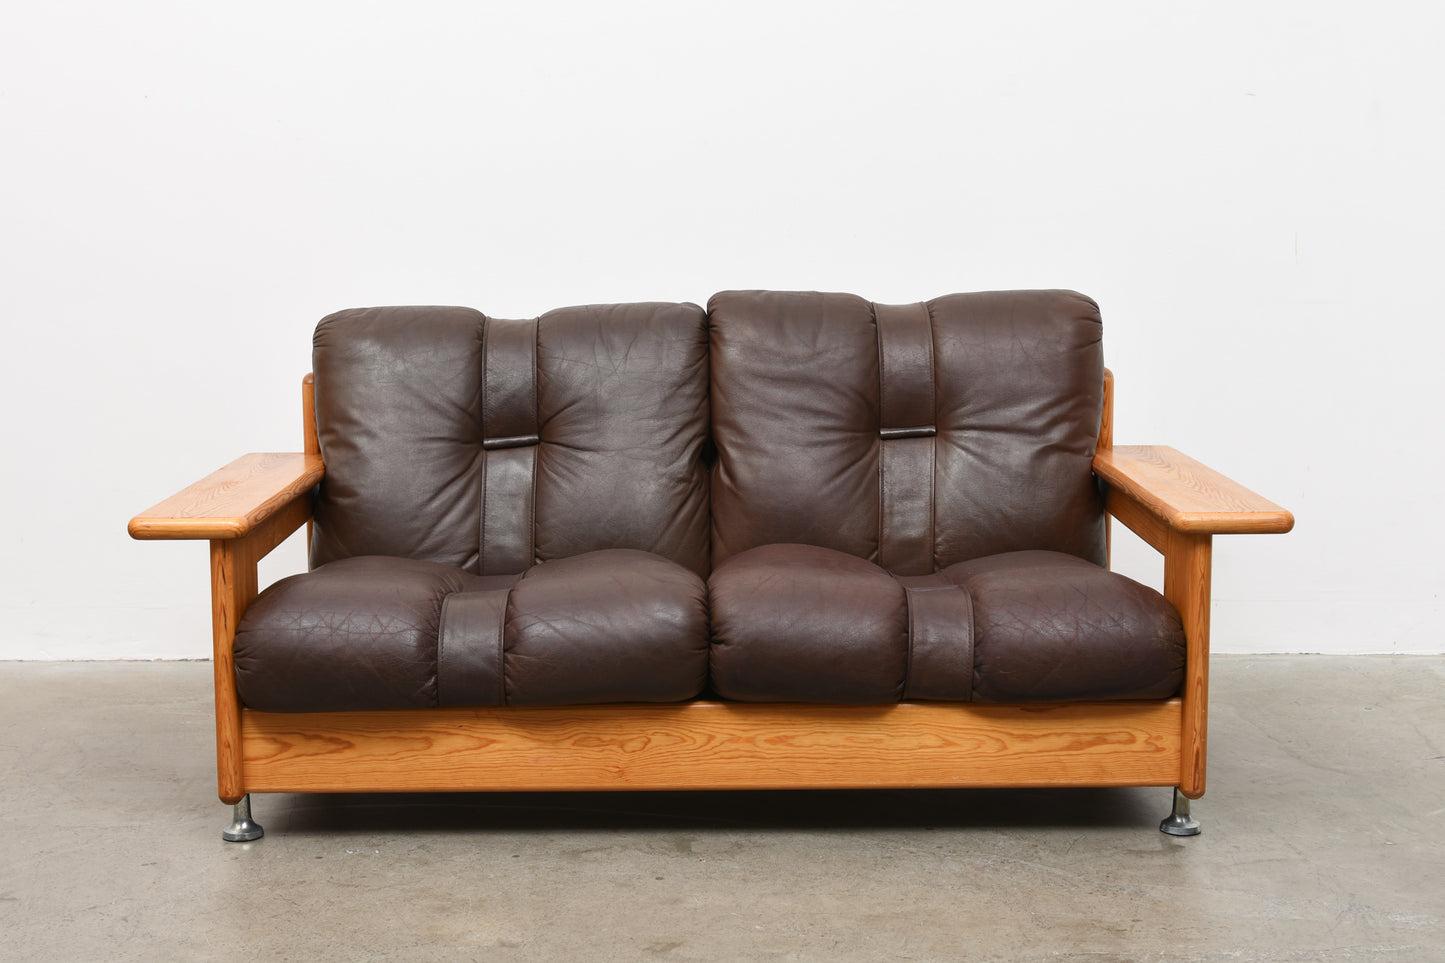 1970s Finnish pine + leather two seater